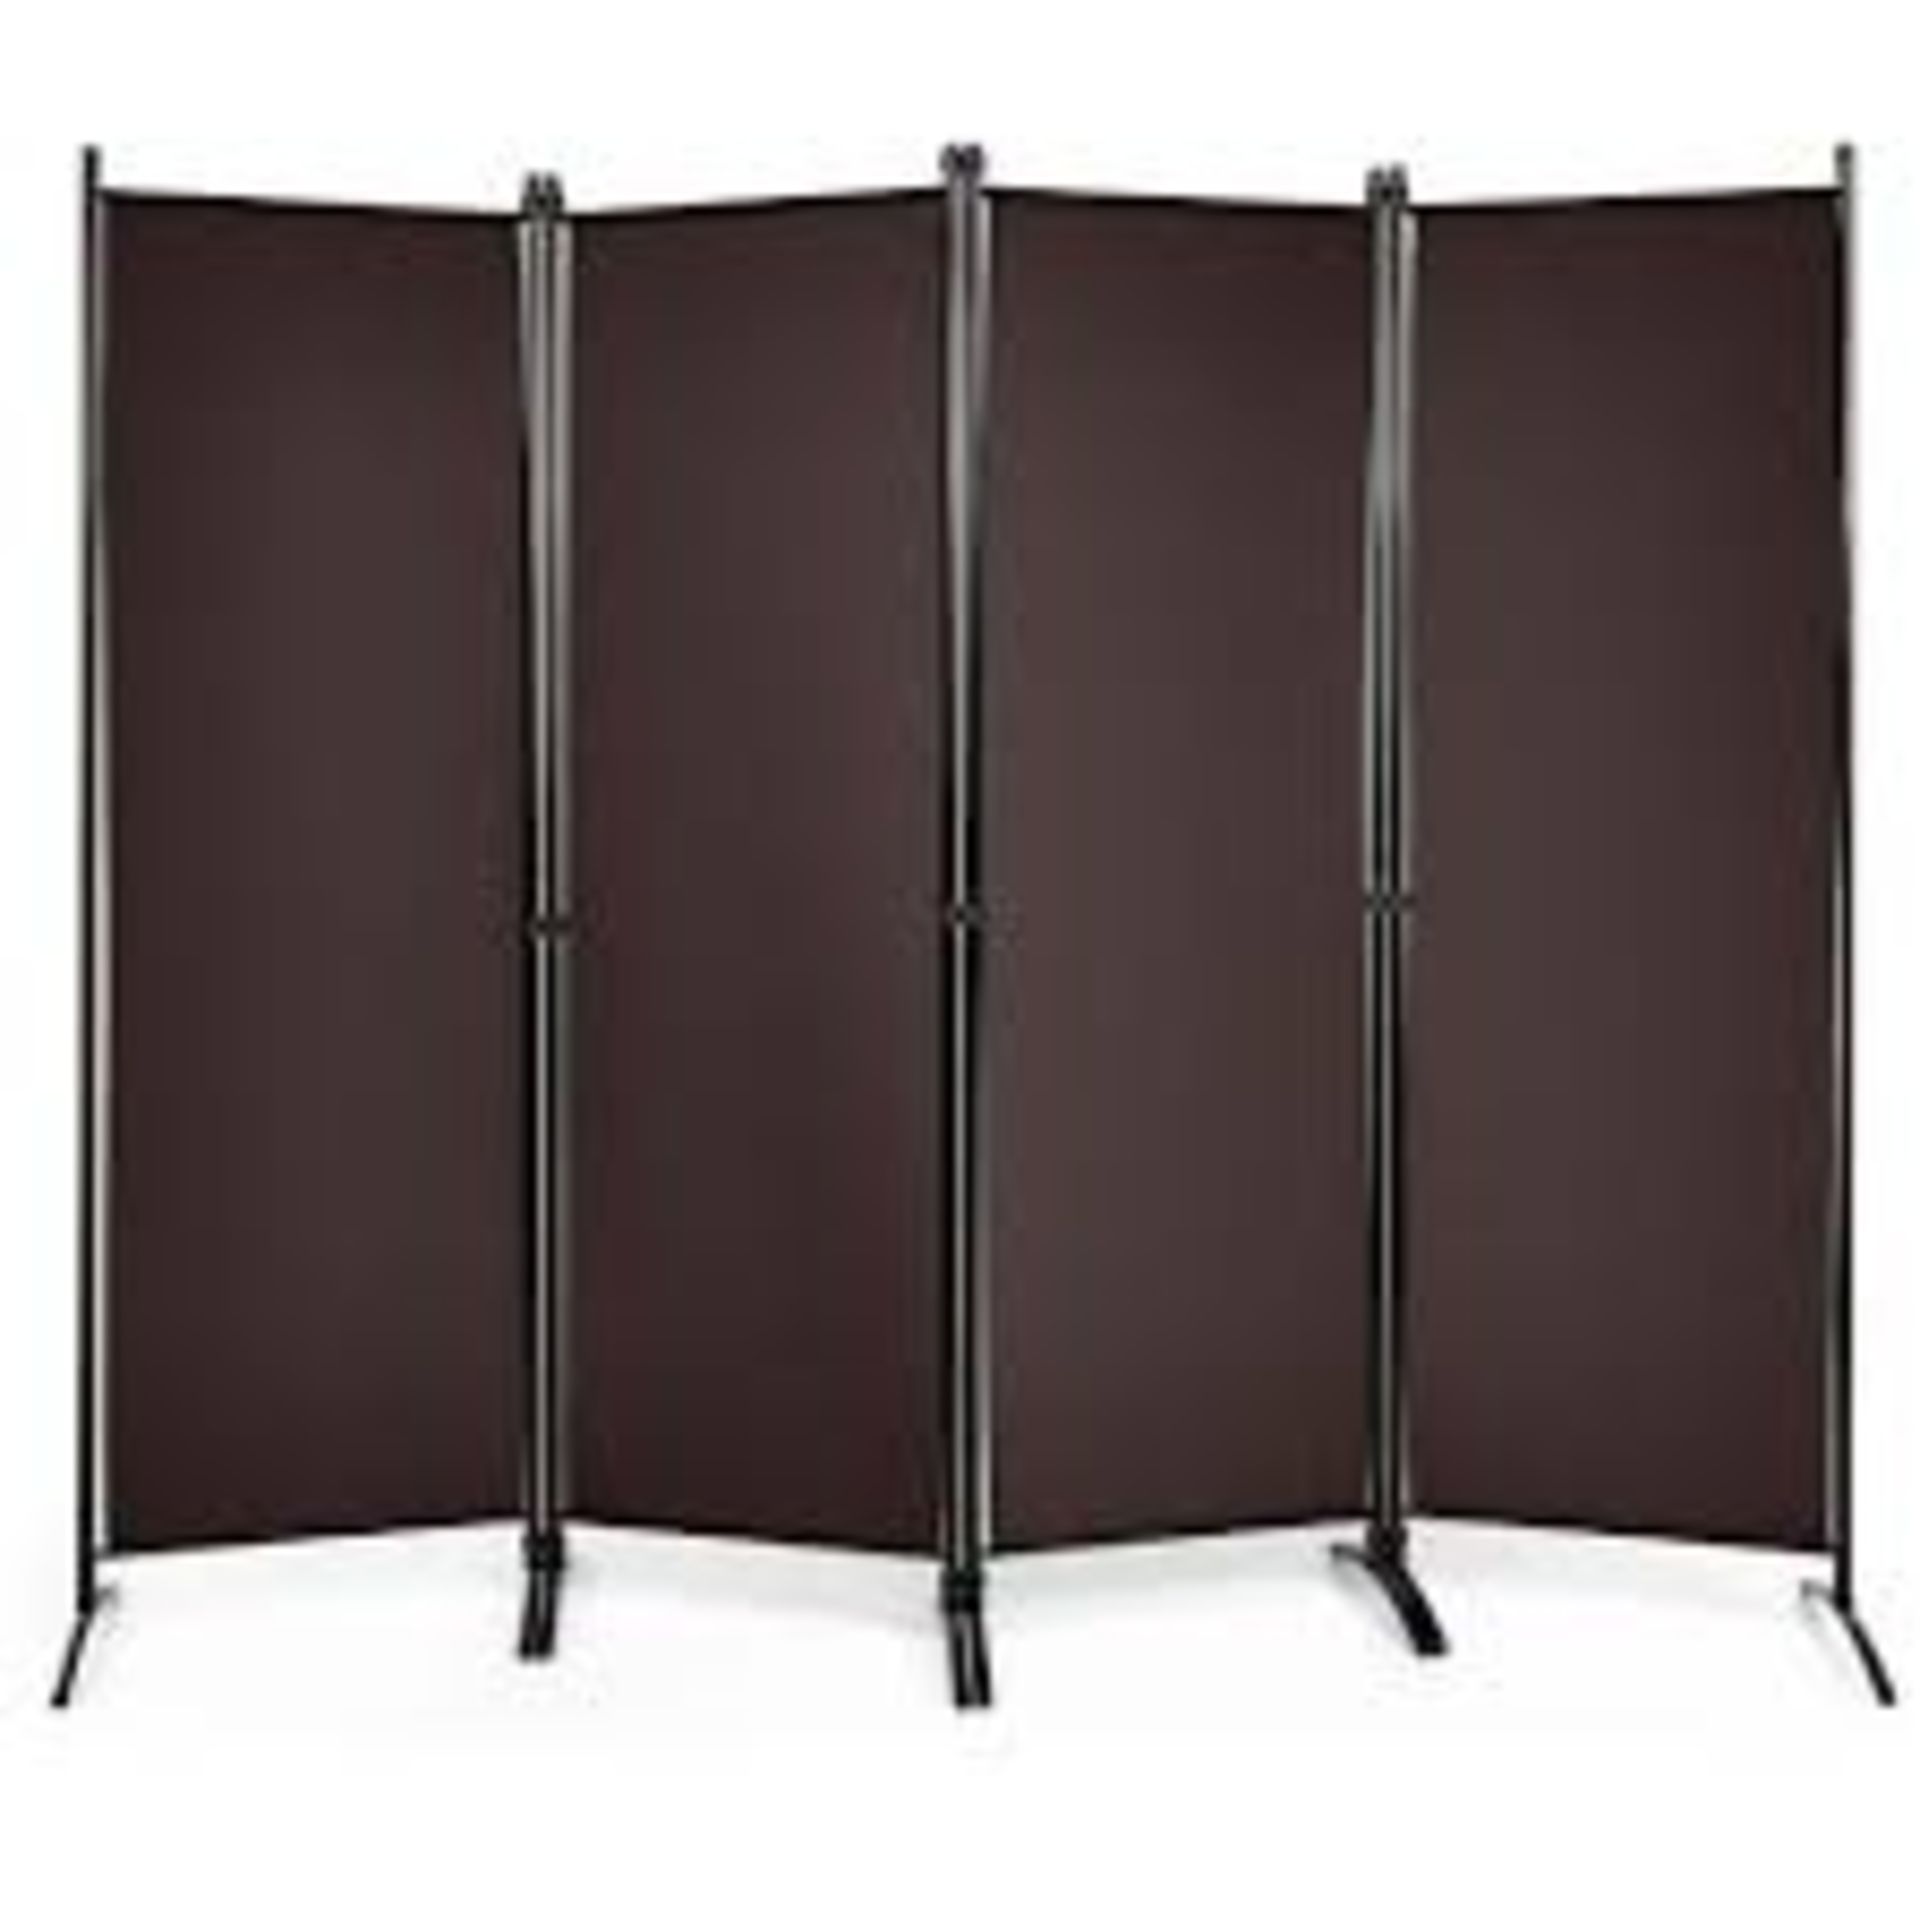 3 x Costway 5.6ft Brown 4-Panel Room Divider Folding Fabric Privacy. - R14.7.